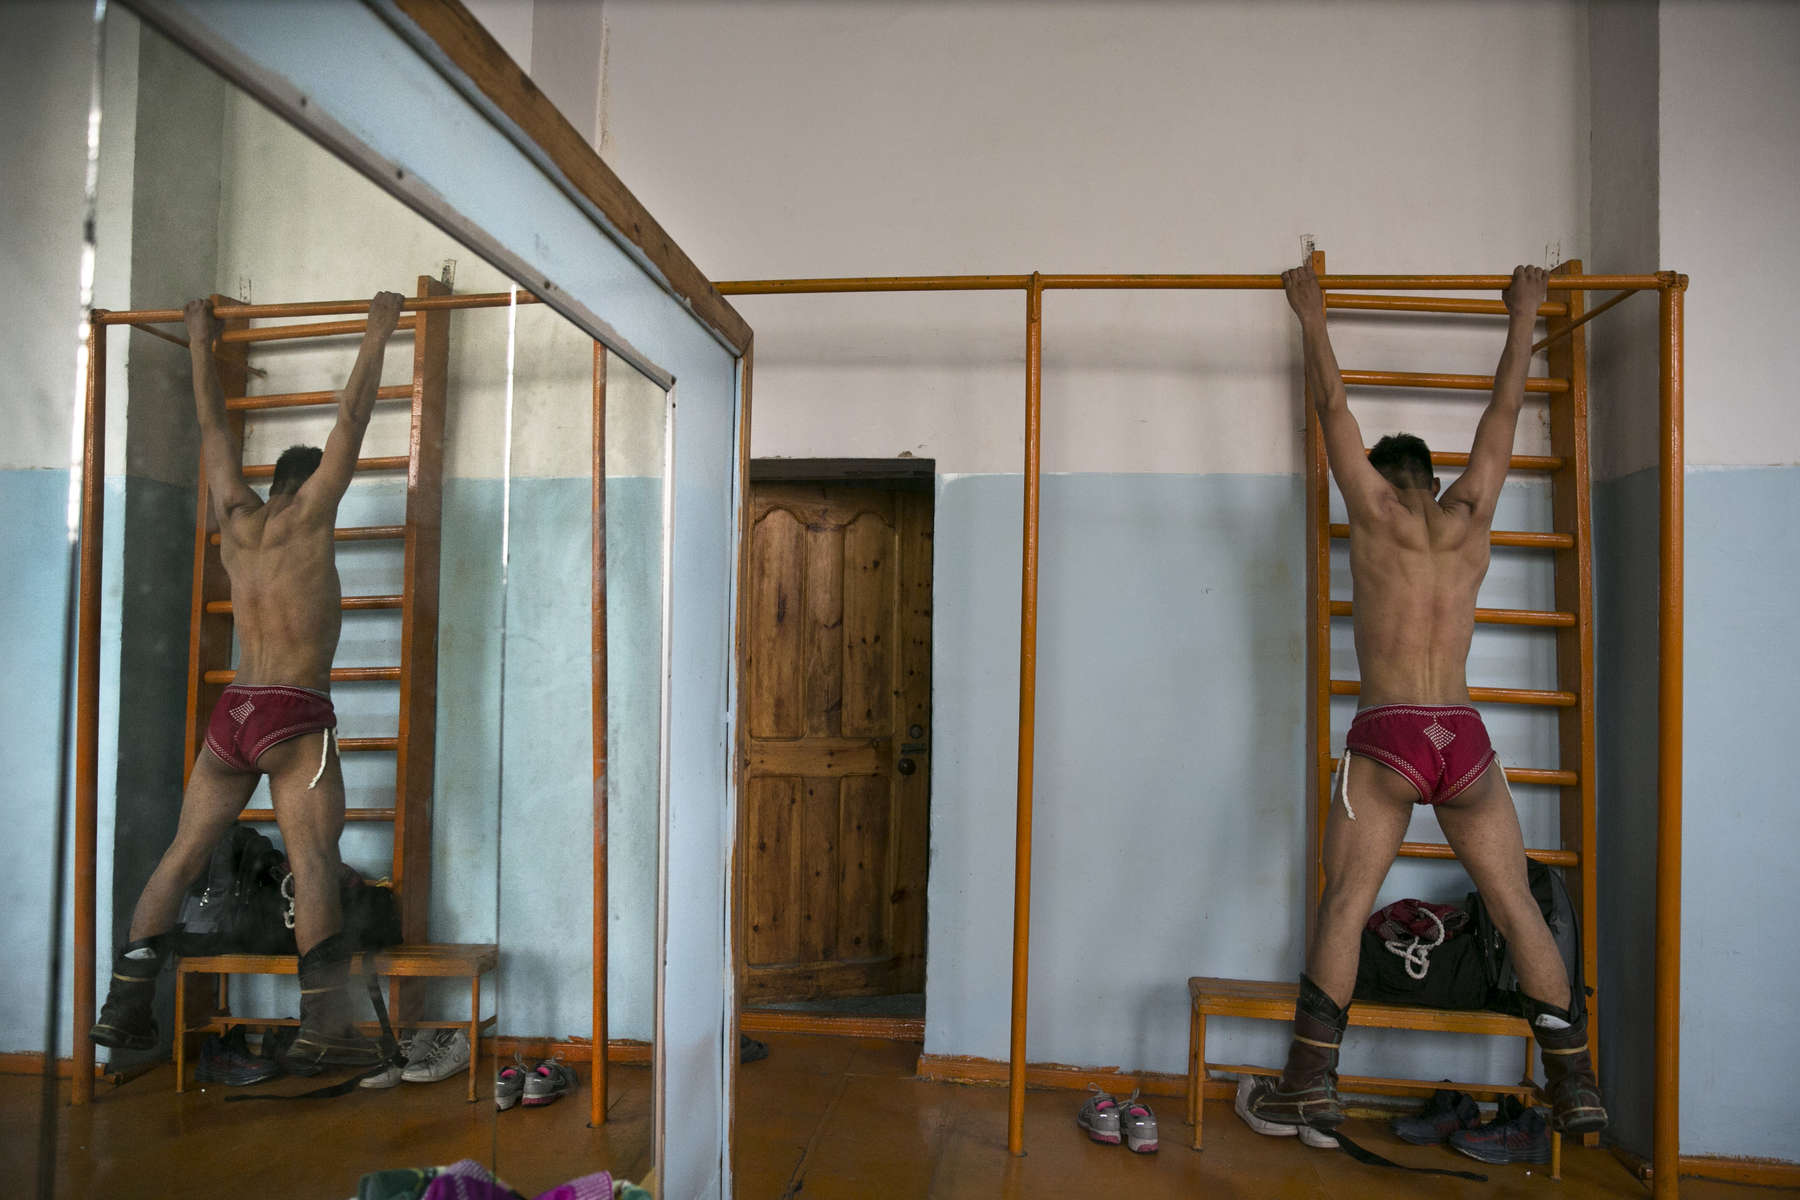 A Mongolian wrestler uses a bar to do pull ups during practice at a local wrestling schol. Mongolia is the most sparsely populated country on earth, but its people are some of the strongest. In Mongolia, wrestling is the most important sport that runs deep into its culture along with horsemanship and archery. Going back for hundreds of years, history books tell the story of how Genghis Khan considered wrestling to be an important way to keep his army combat ready while back in the Qing Dynasty (1646–1911) regular wrestling events were held. In Mongolia’s capitol city, Ulan Batar is home to many wrestling schools where almost daily you can see dozens of young men sweating in crowded gyms while in schools both girls and boys are taught some wrestling techniques.While my photo story gives a real behind the scenes look, it is unusual for a woman to document this macho scene of sweat and endurance.